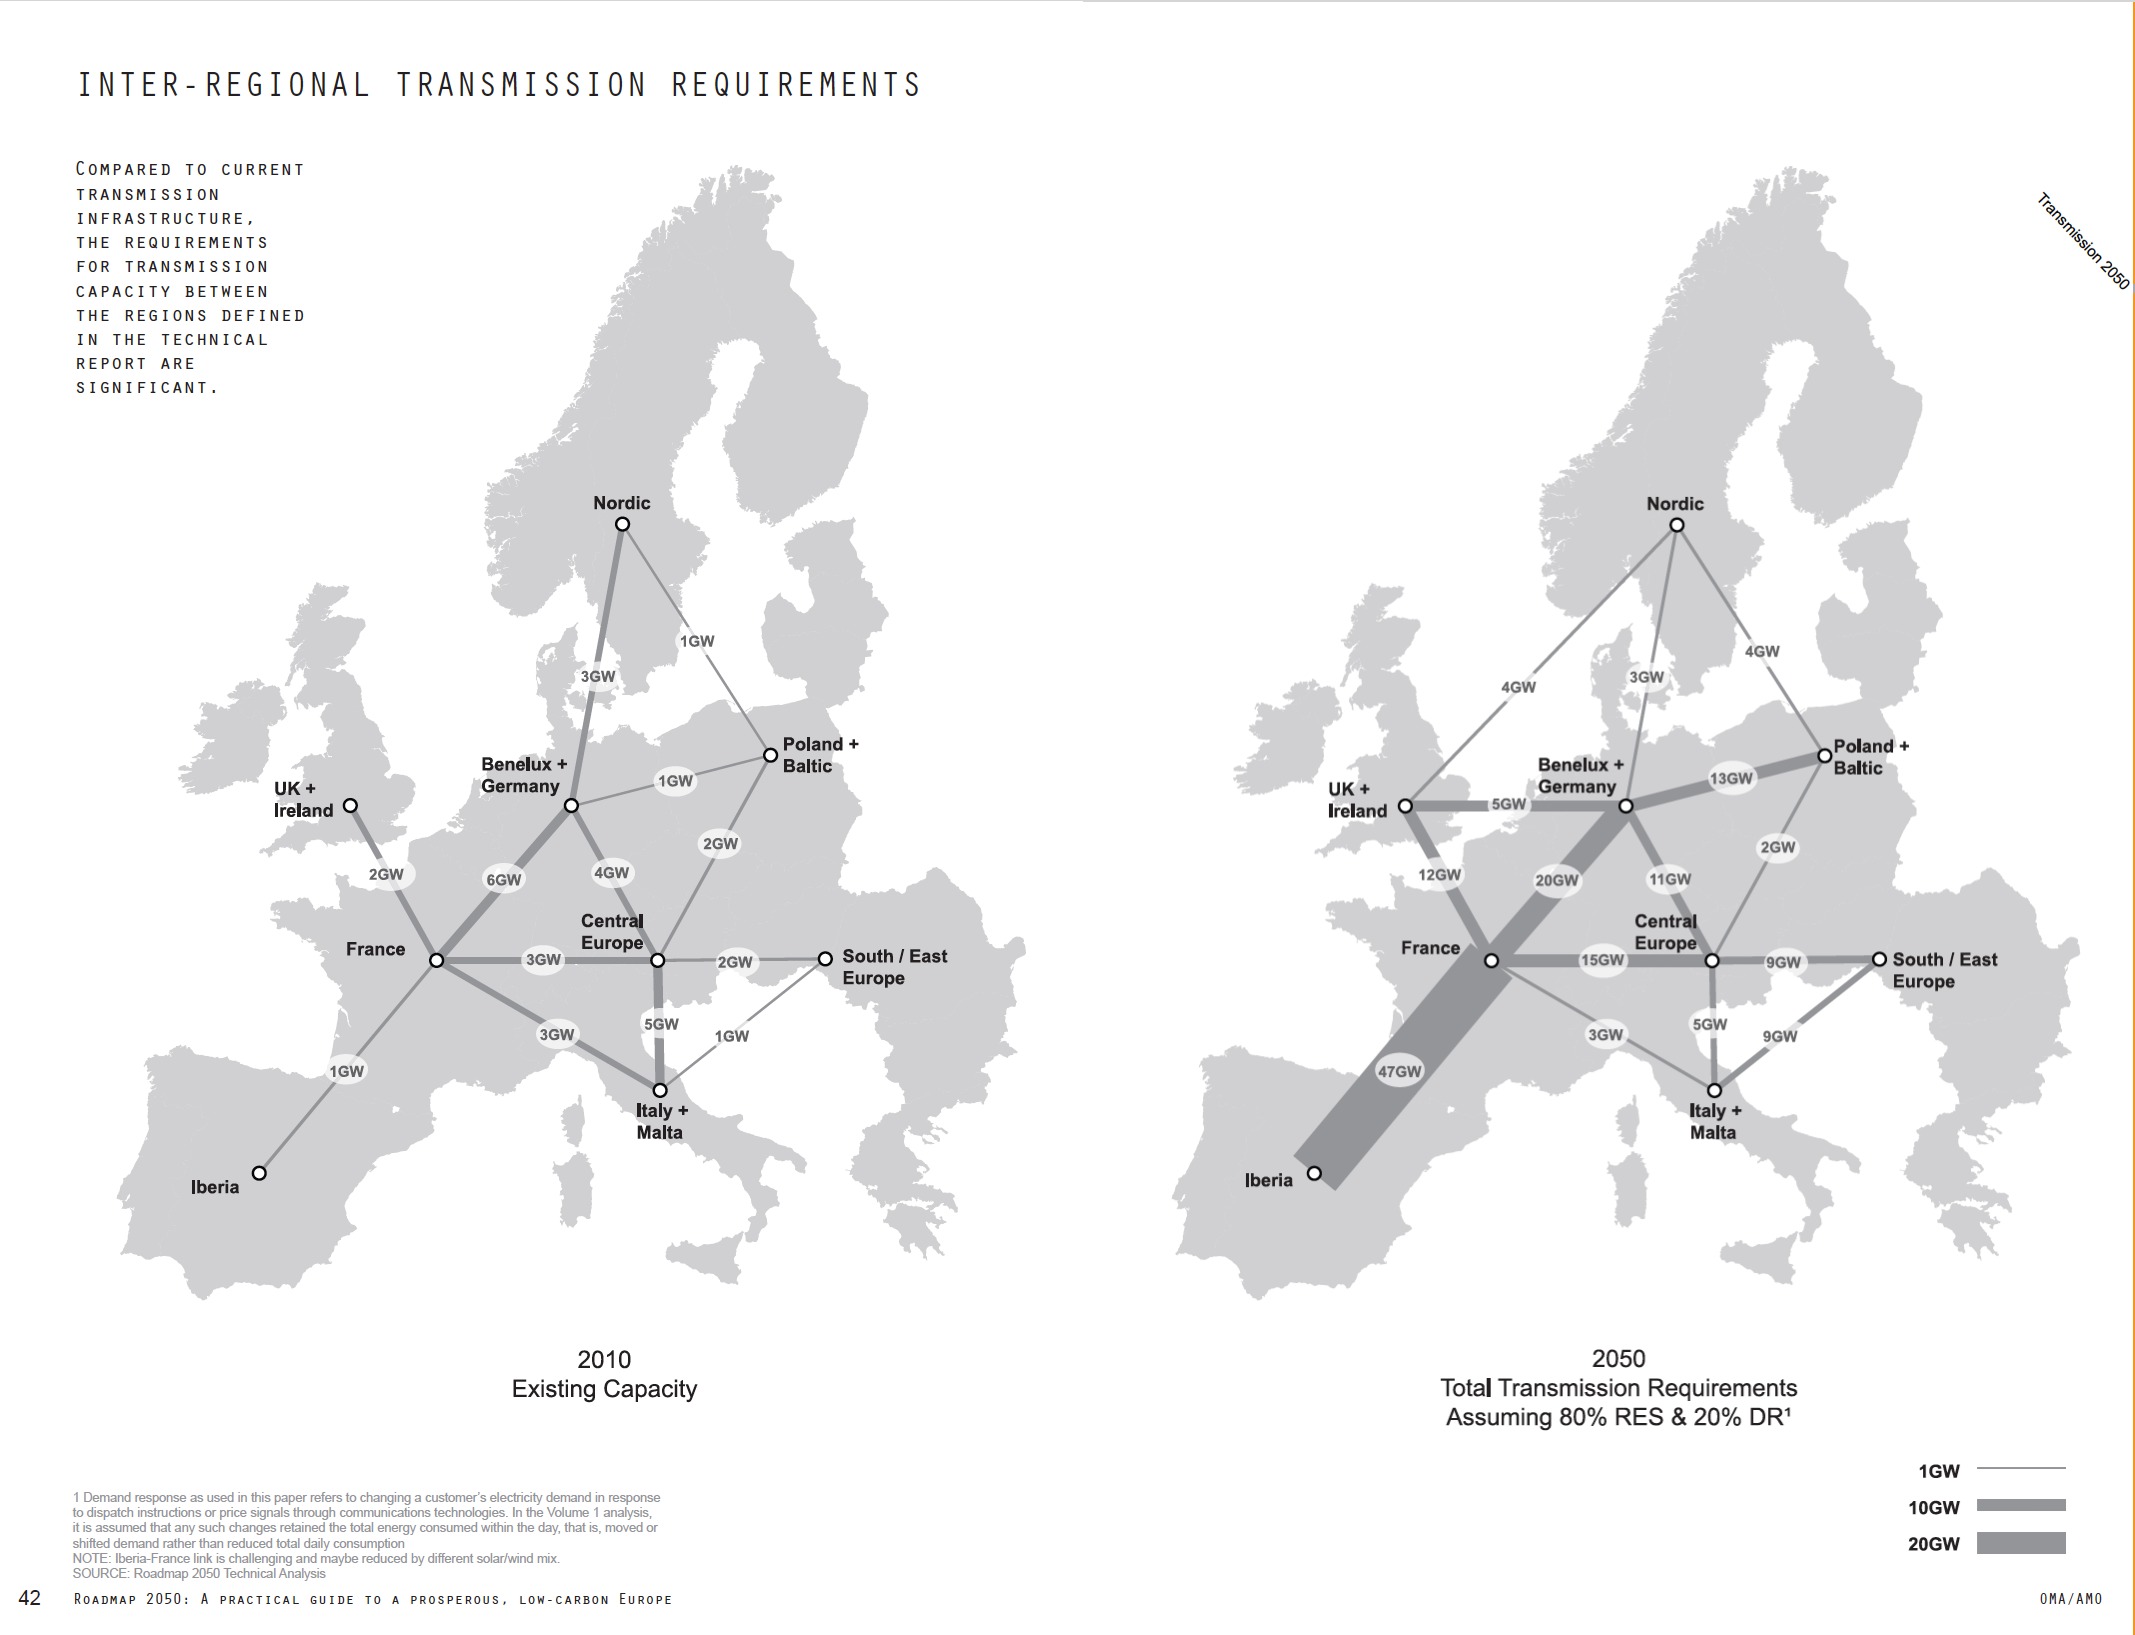 Map comparison showing existing inter-regional transmission capacities in europe for 2020 and projected capacities for 2050 assuming 70% res in the energy mix.